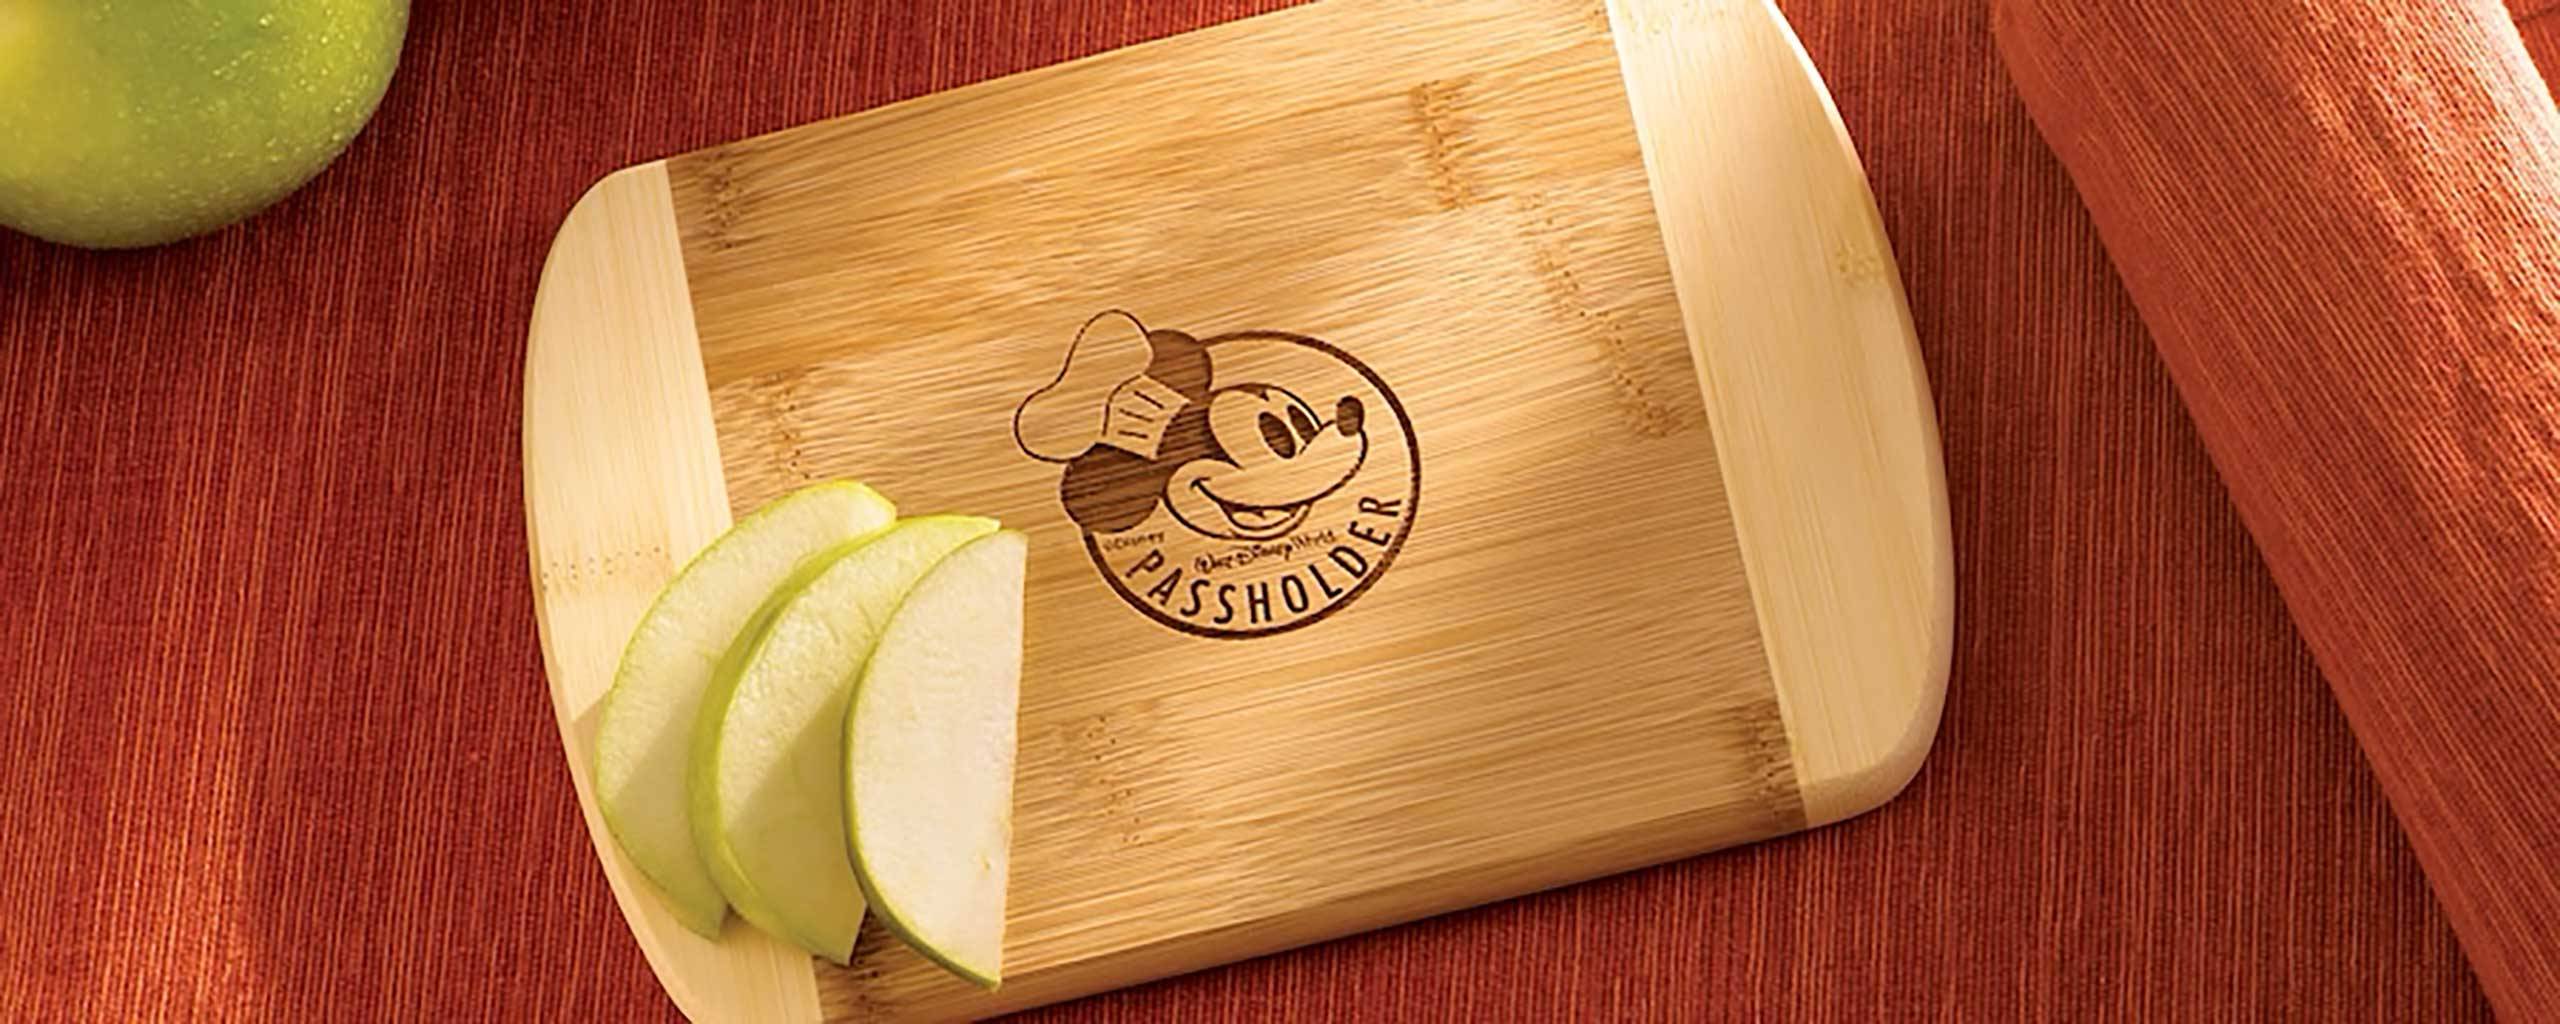 Food and Wine Festival Passholder gift - Chef Mickey cutting board